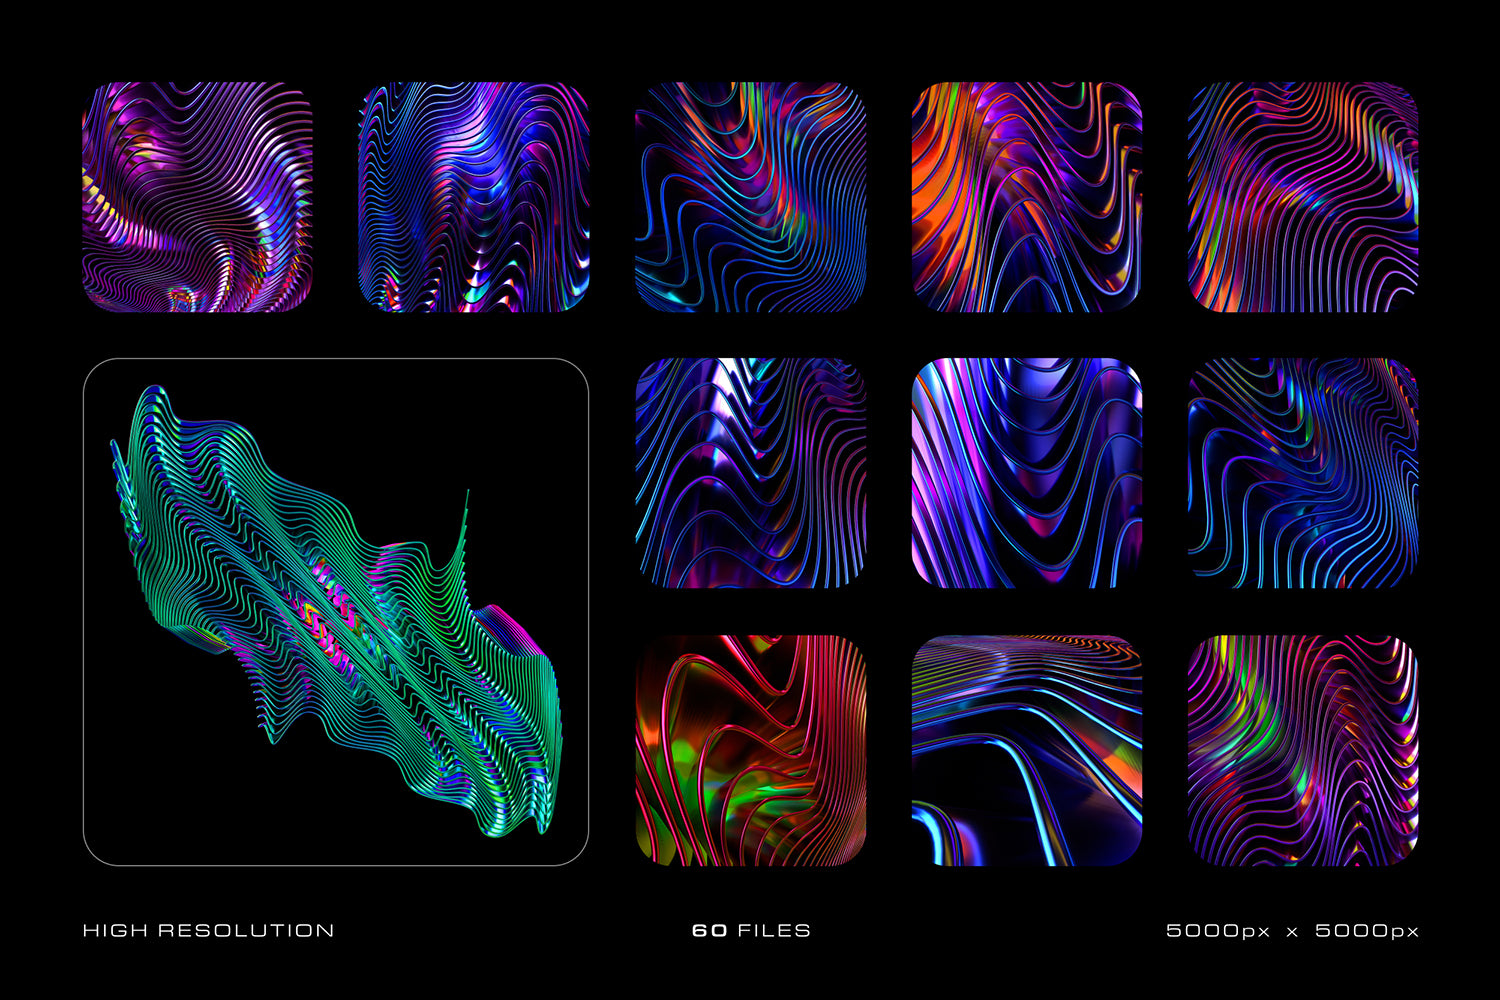 Glossy Waves Backgrounds & Shapes